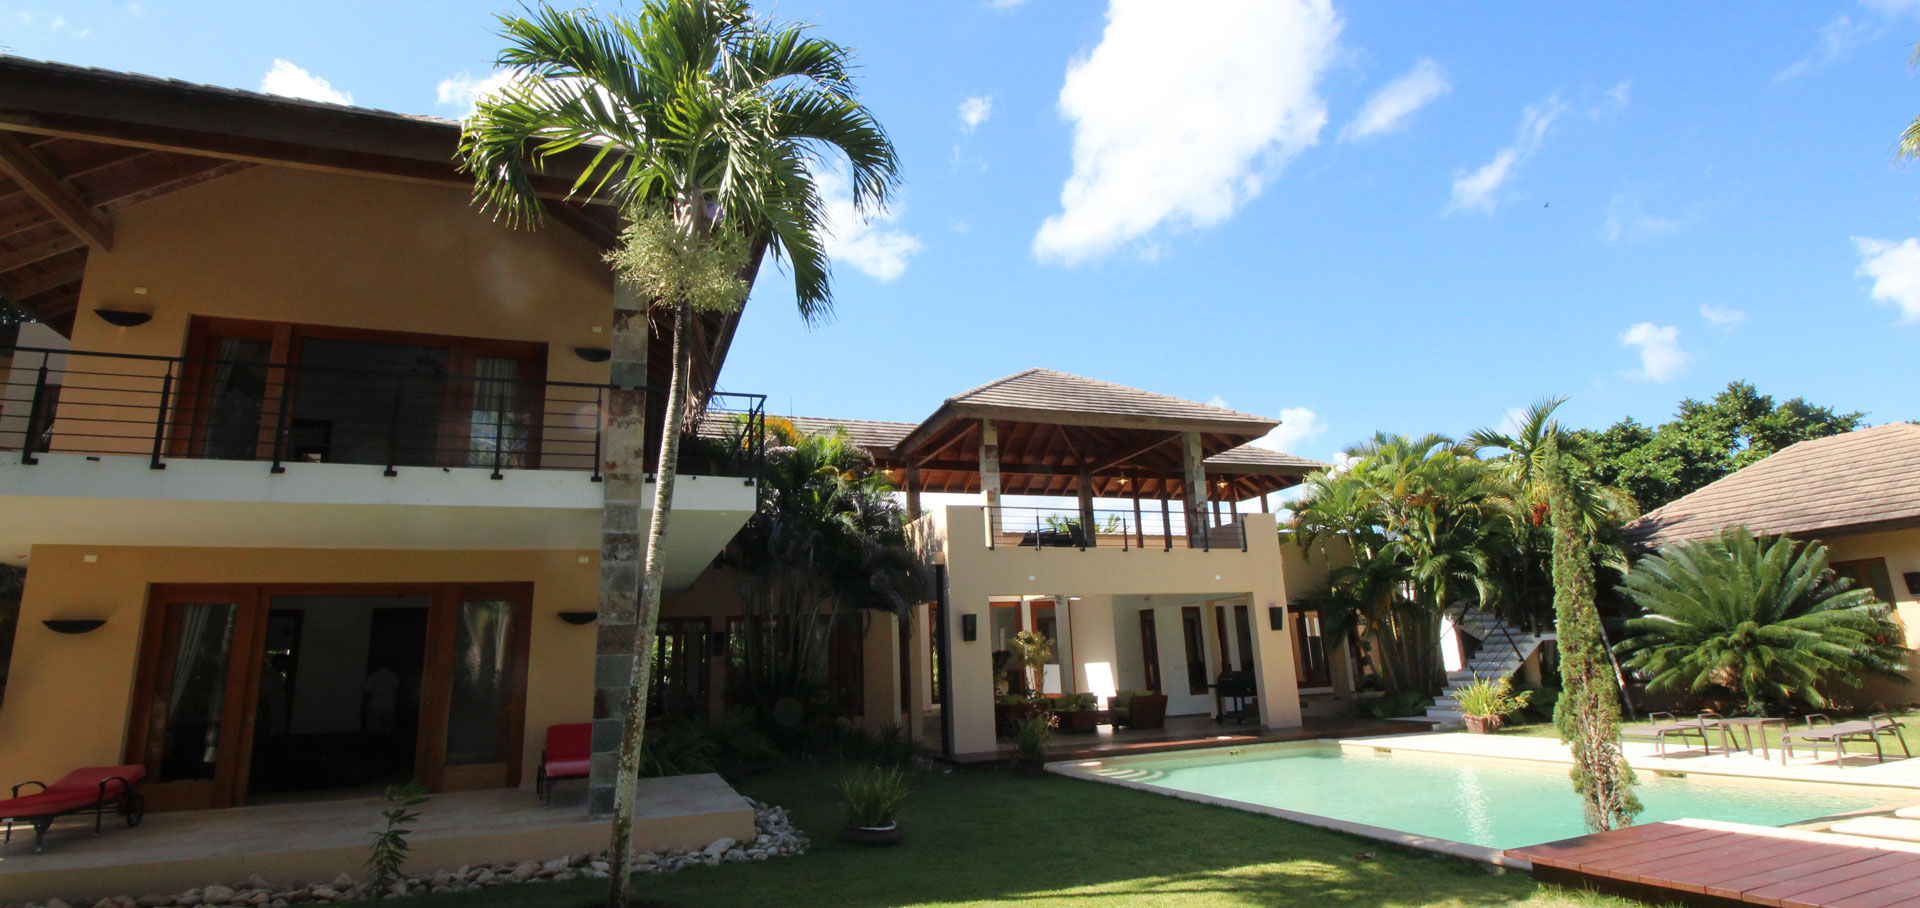 #0 Beautiful Villa with 6 bedrooms in a gated community Cabarete